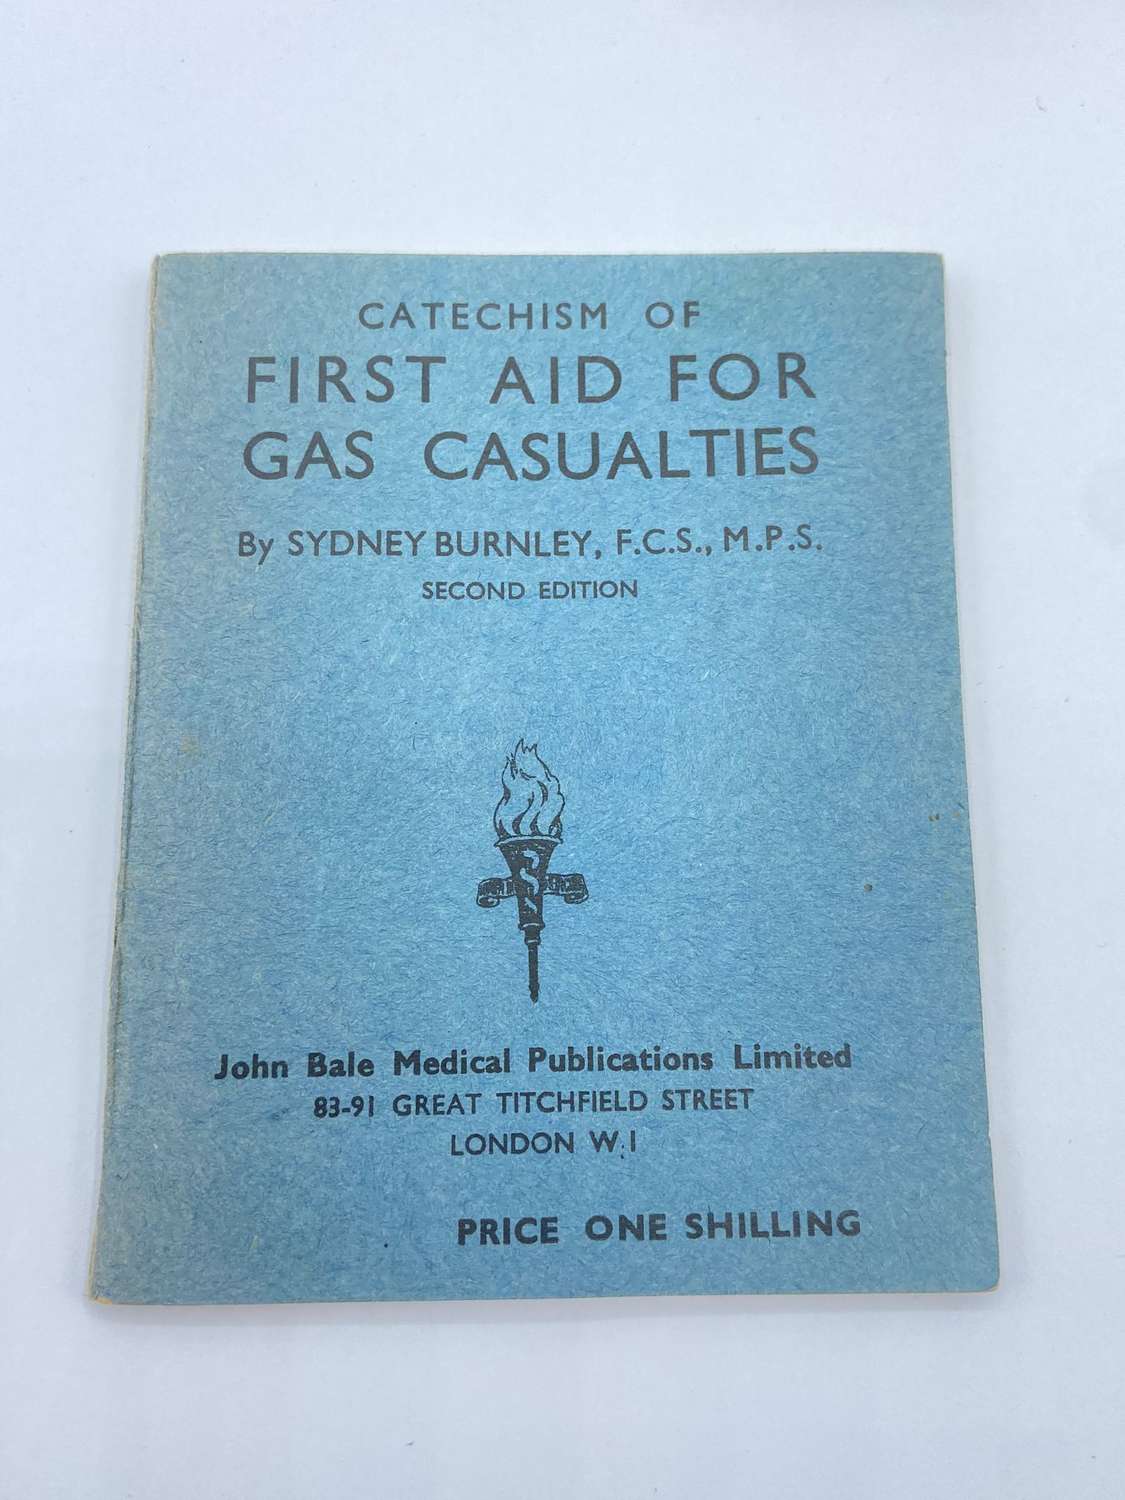 WW2 British Catechism Of First Aid For Gas Casualties 1943